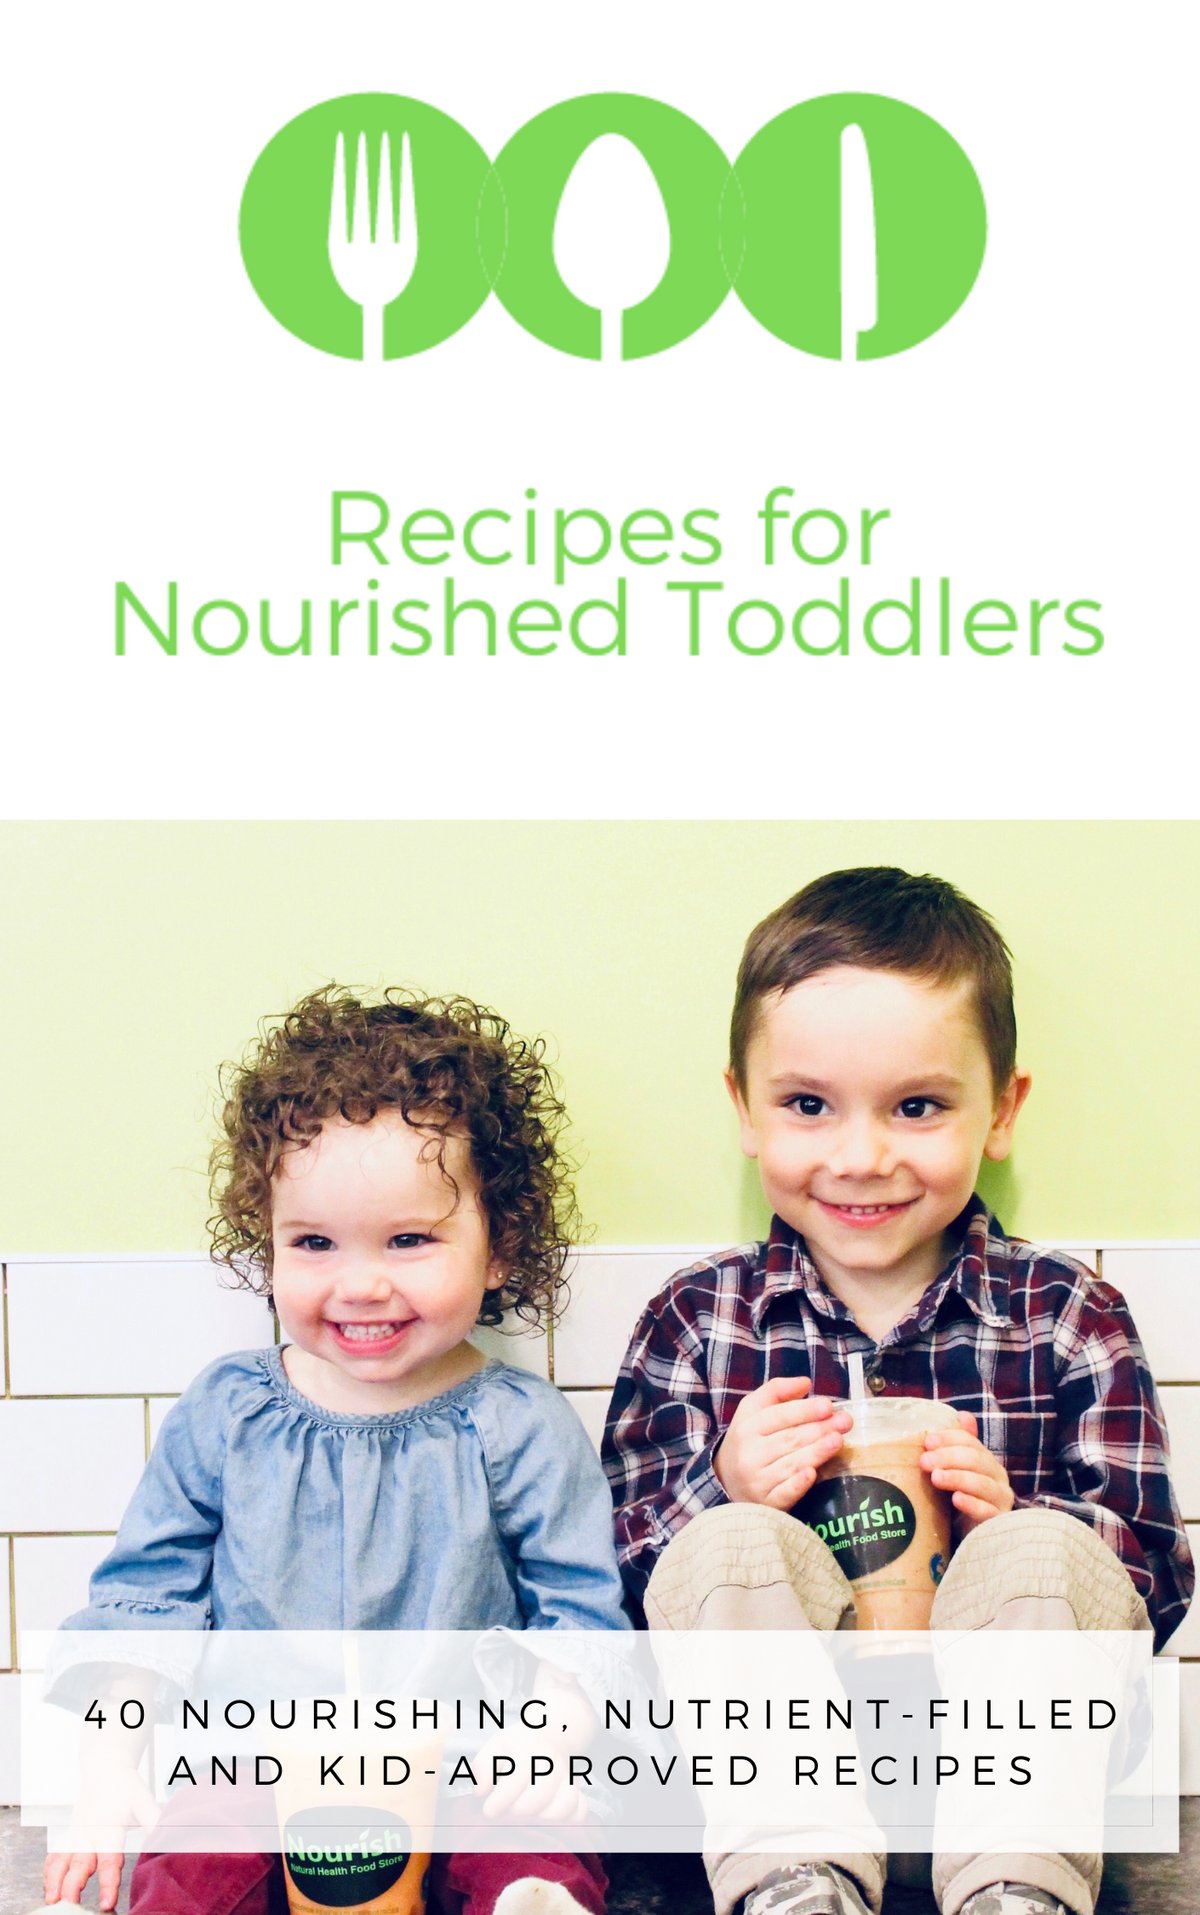 Recipes for Nourished Toddlers